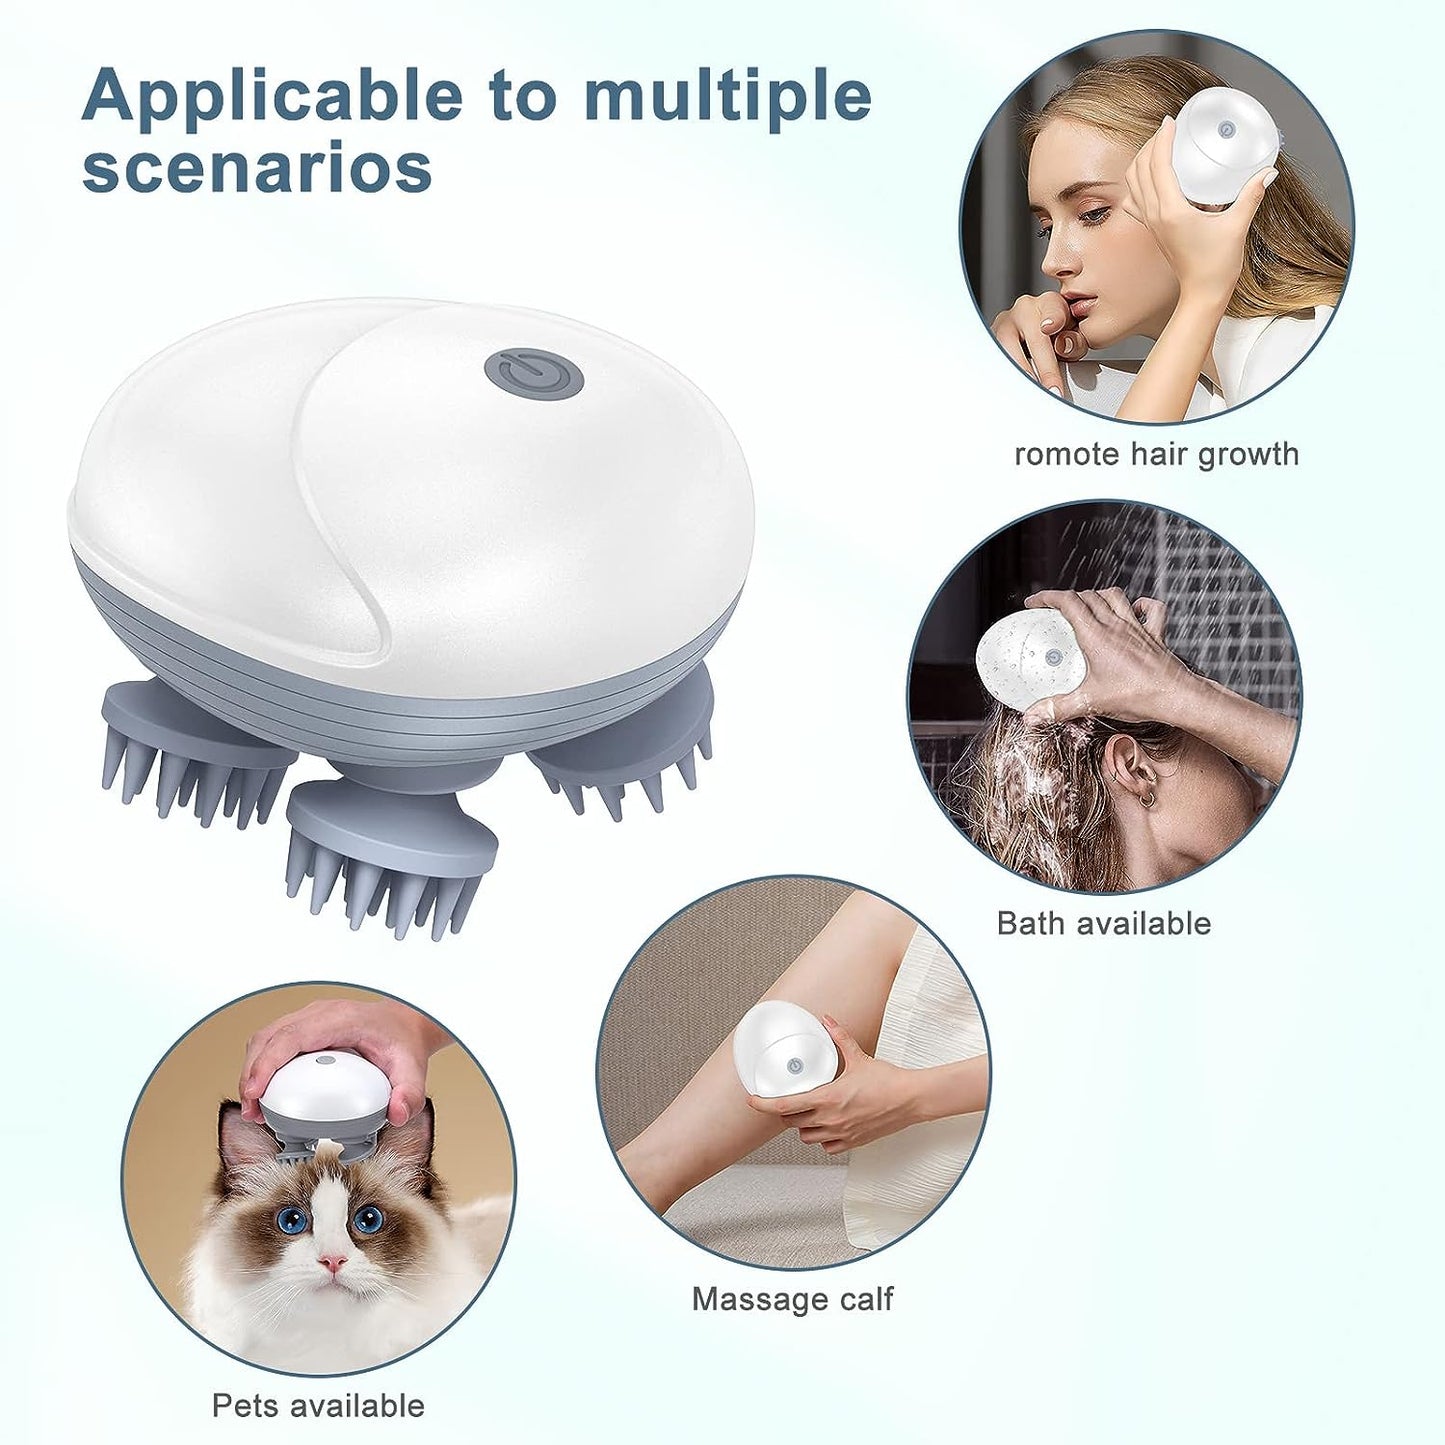 Upgraded Handheld Pet Massager for Dogs and Cats, Electric Cat Massager Dog Massager, with 4 Rotatable Massage Heads, Three Modes, for Relieving Tight Stiffness Muscles, Promote Bonding